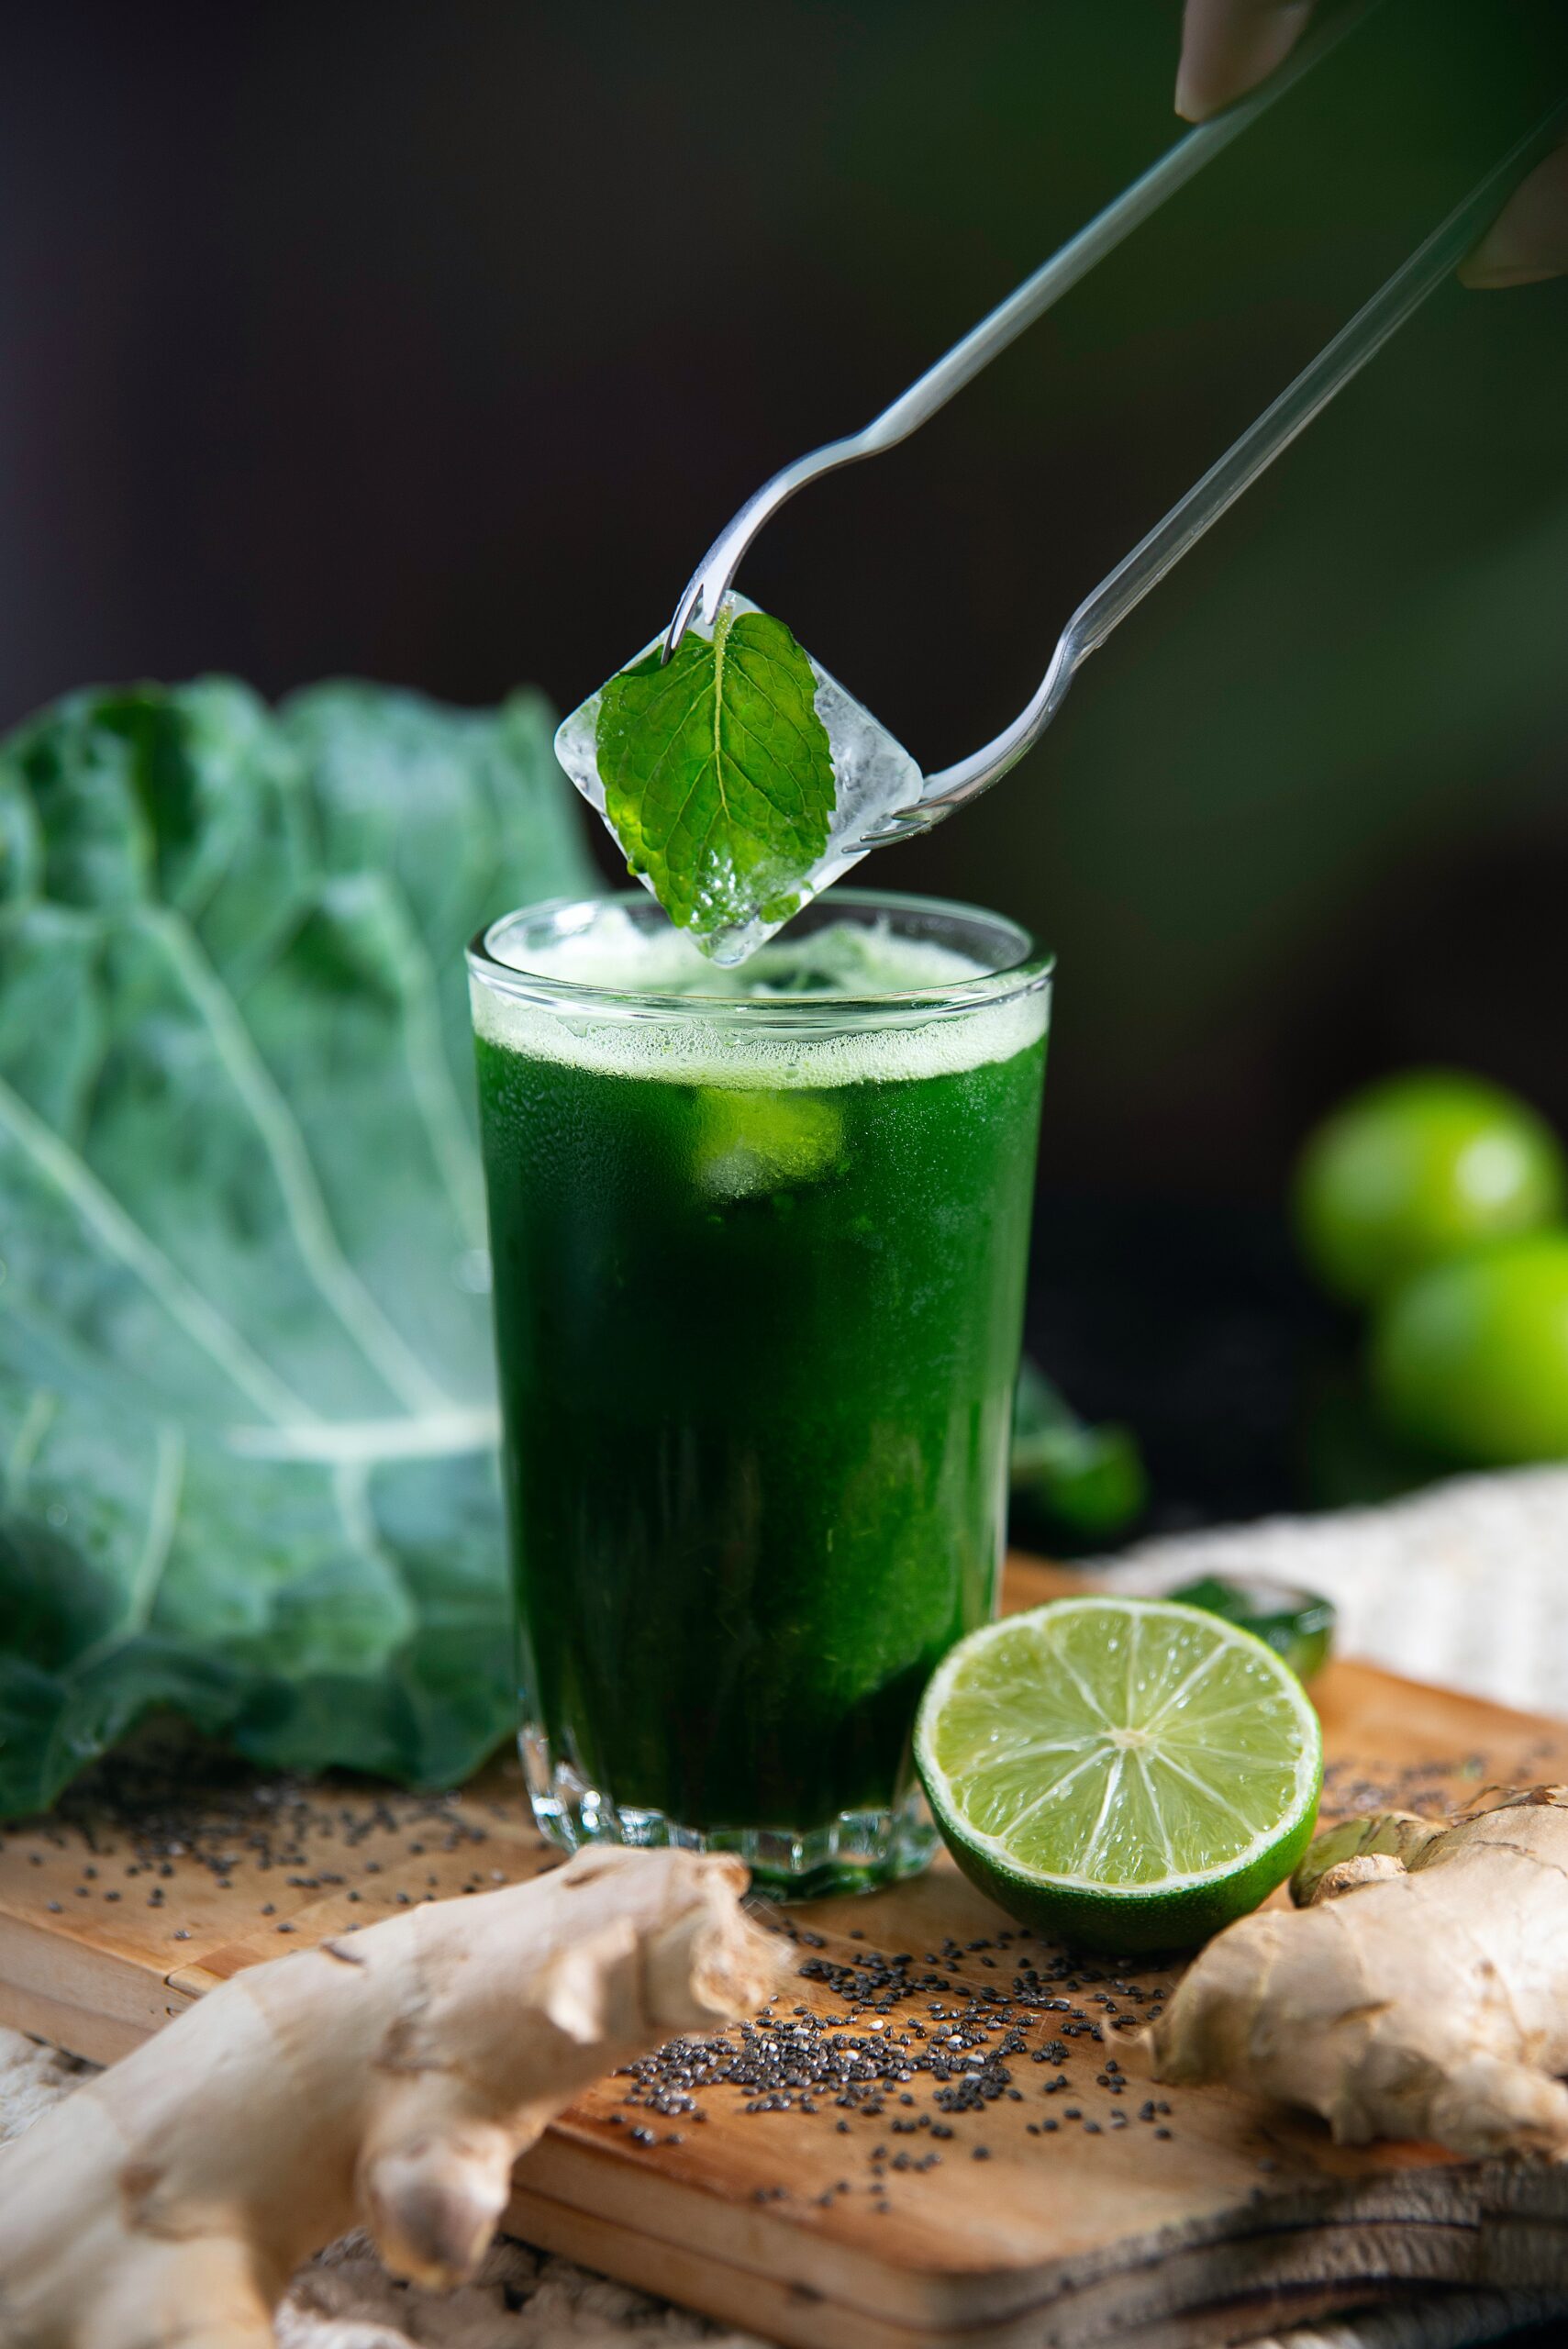 A glass of fresh green juice